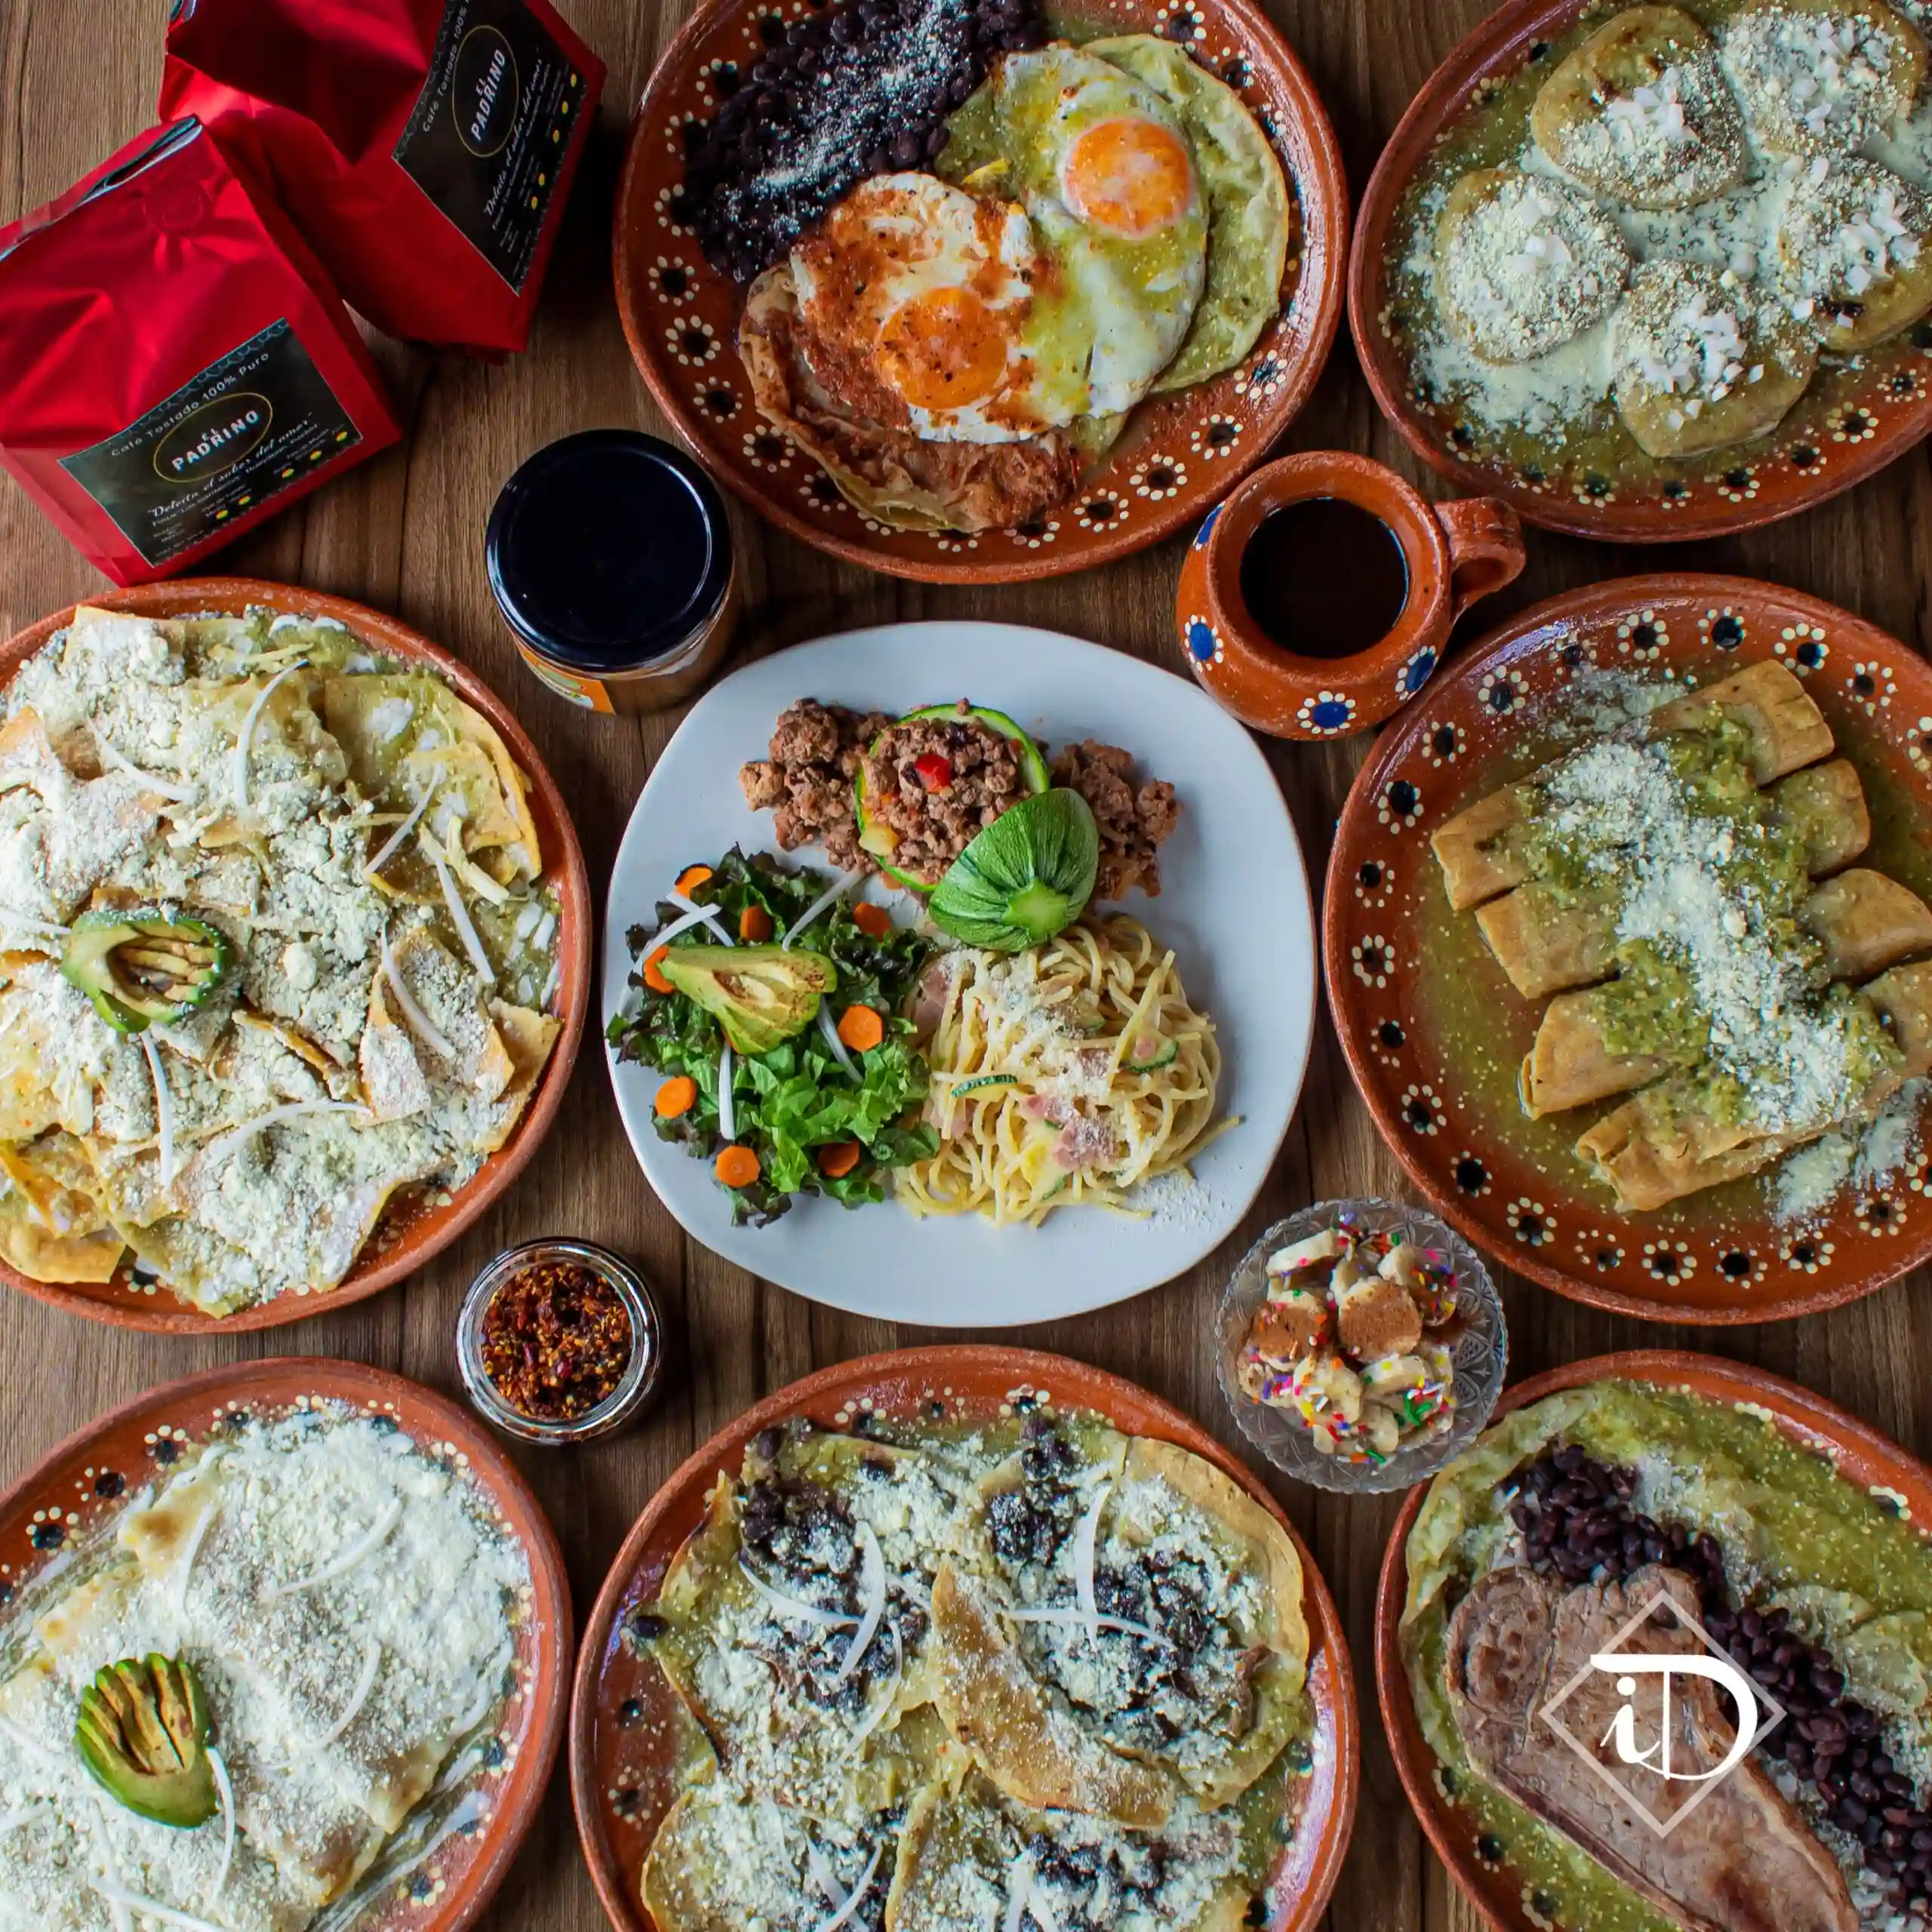 A table with many different dishes of food